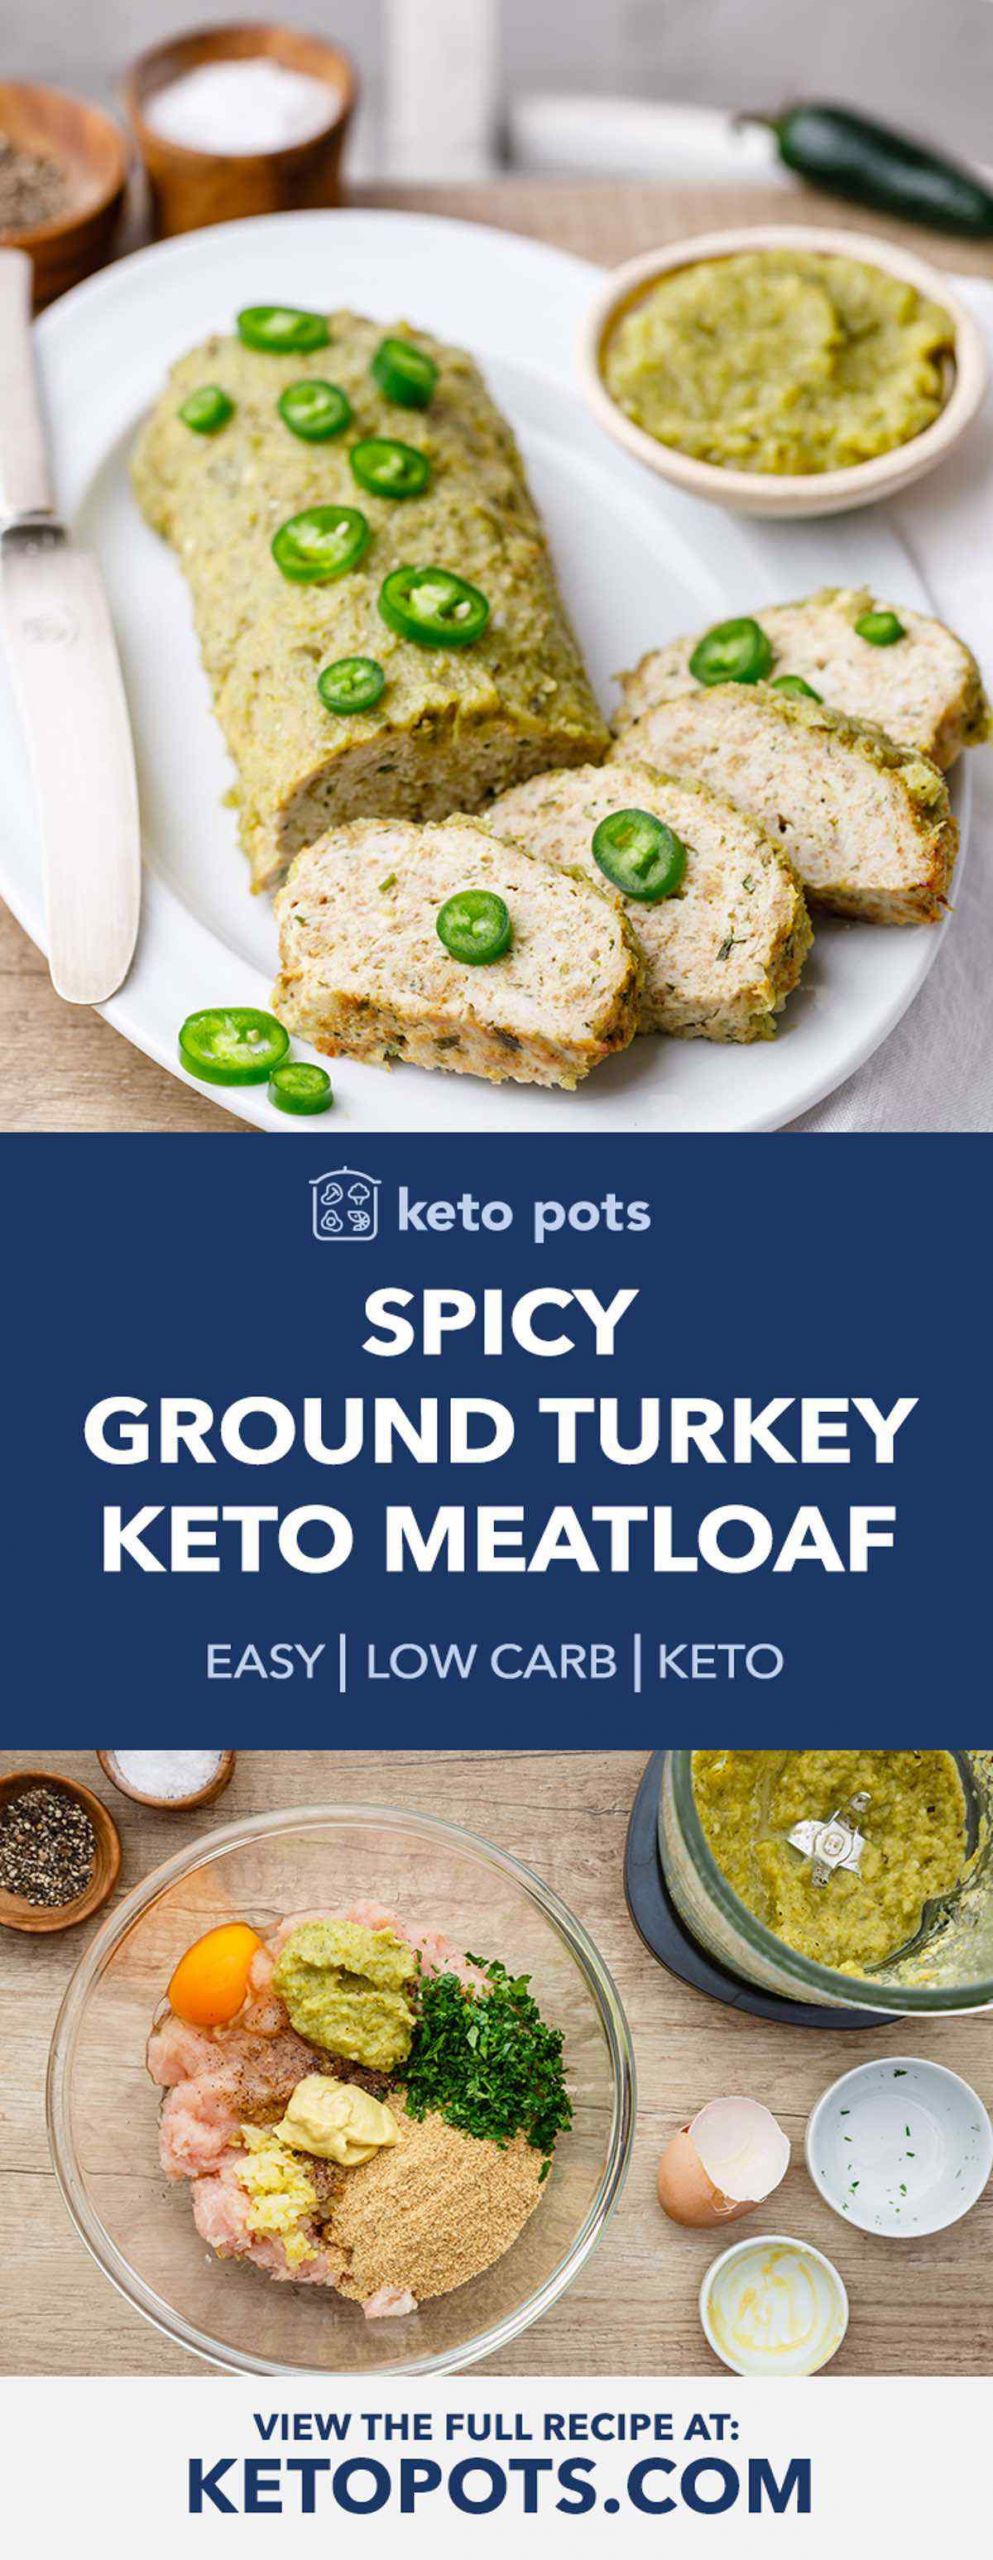 Ground Turkey Keto Meatloaf
 Mouthwatering Ground Turkey Meatloaf with Jalapeno Relish